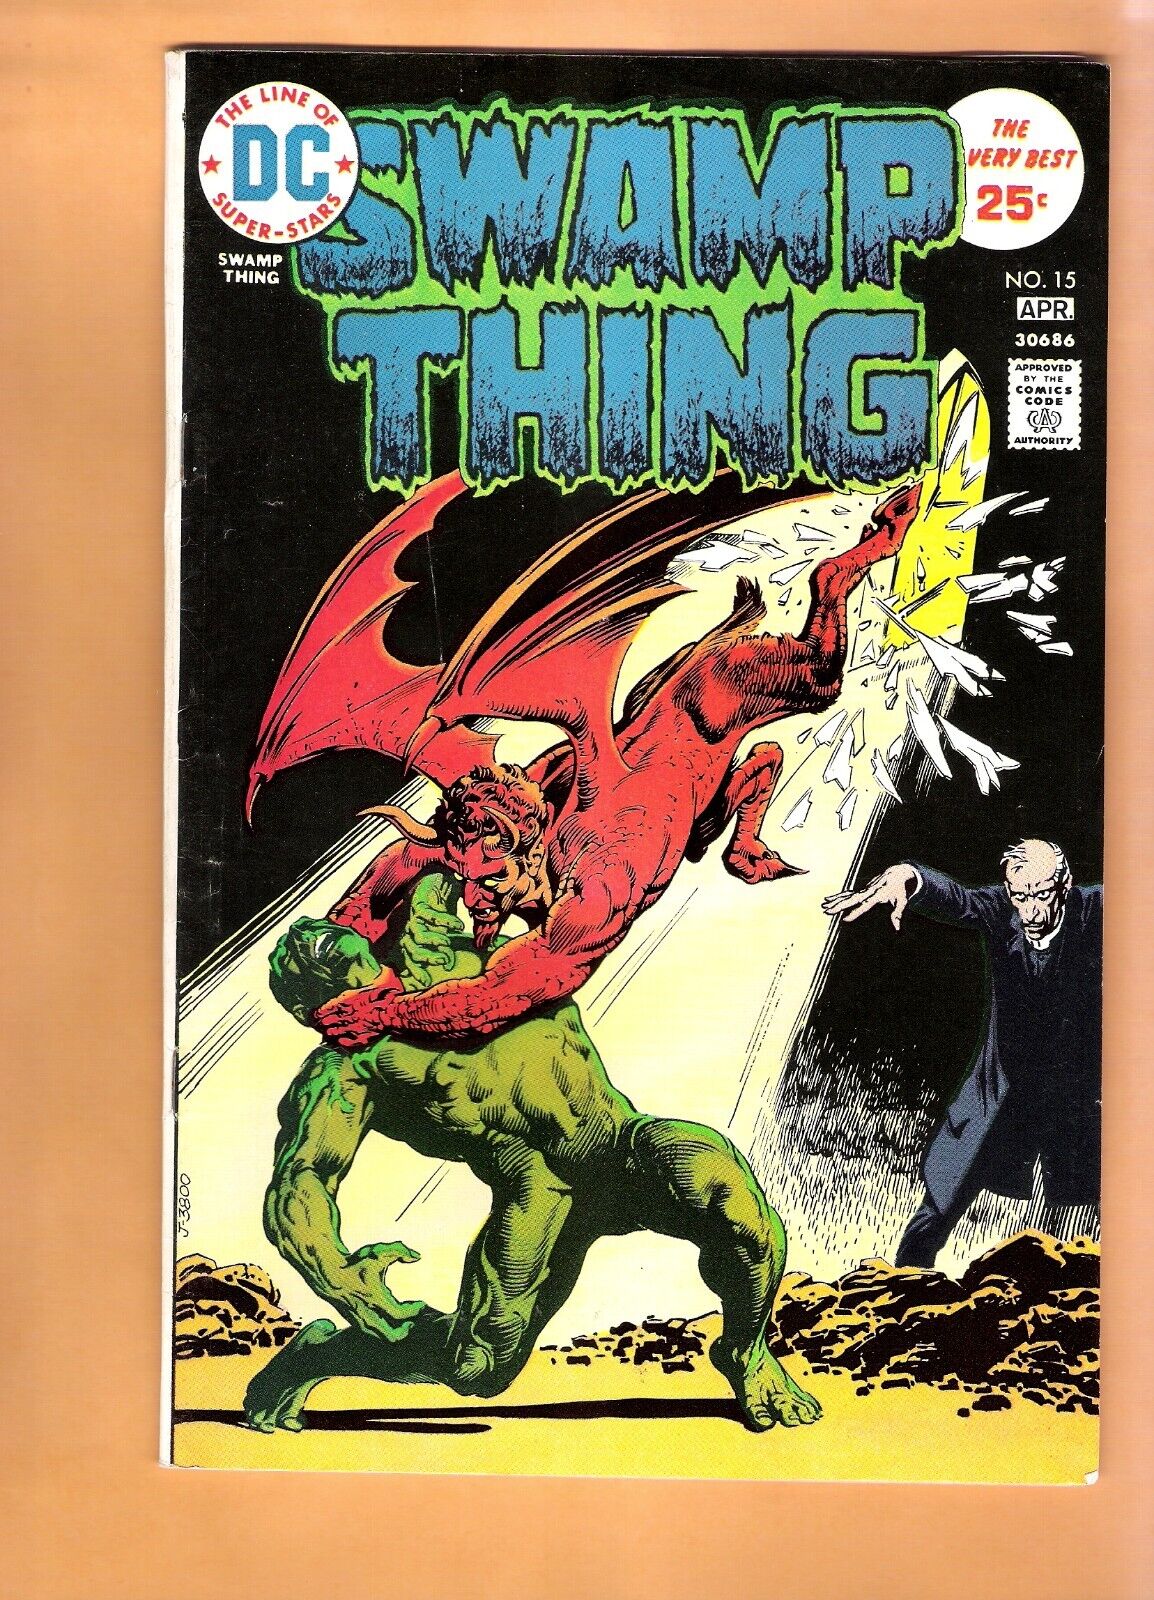 SWAMP THING #15 vintage DC comic book 1975 FINE/VERY FINE